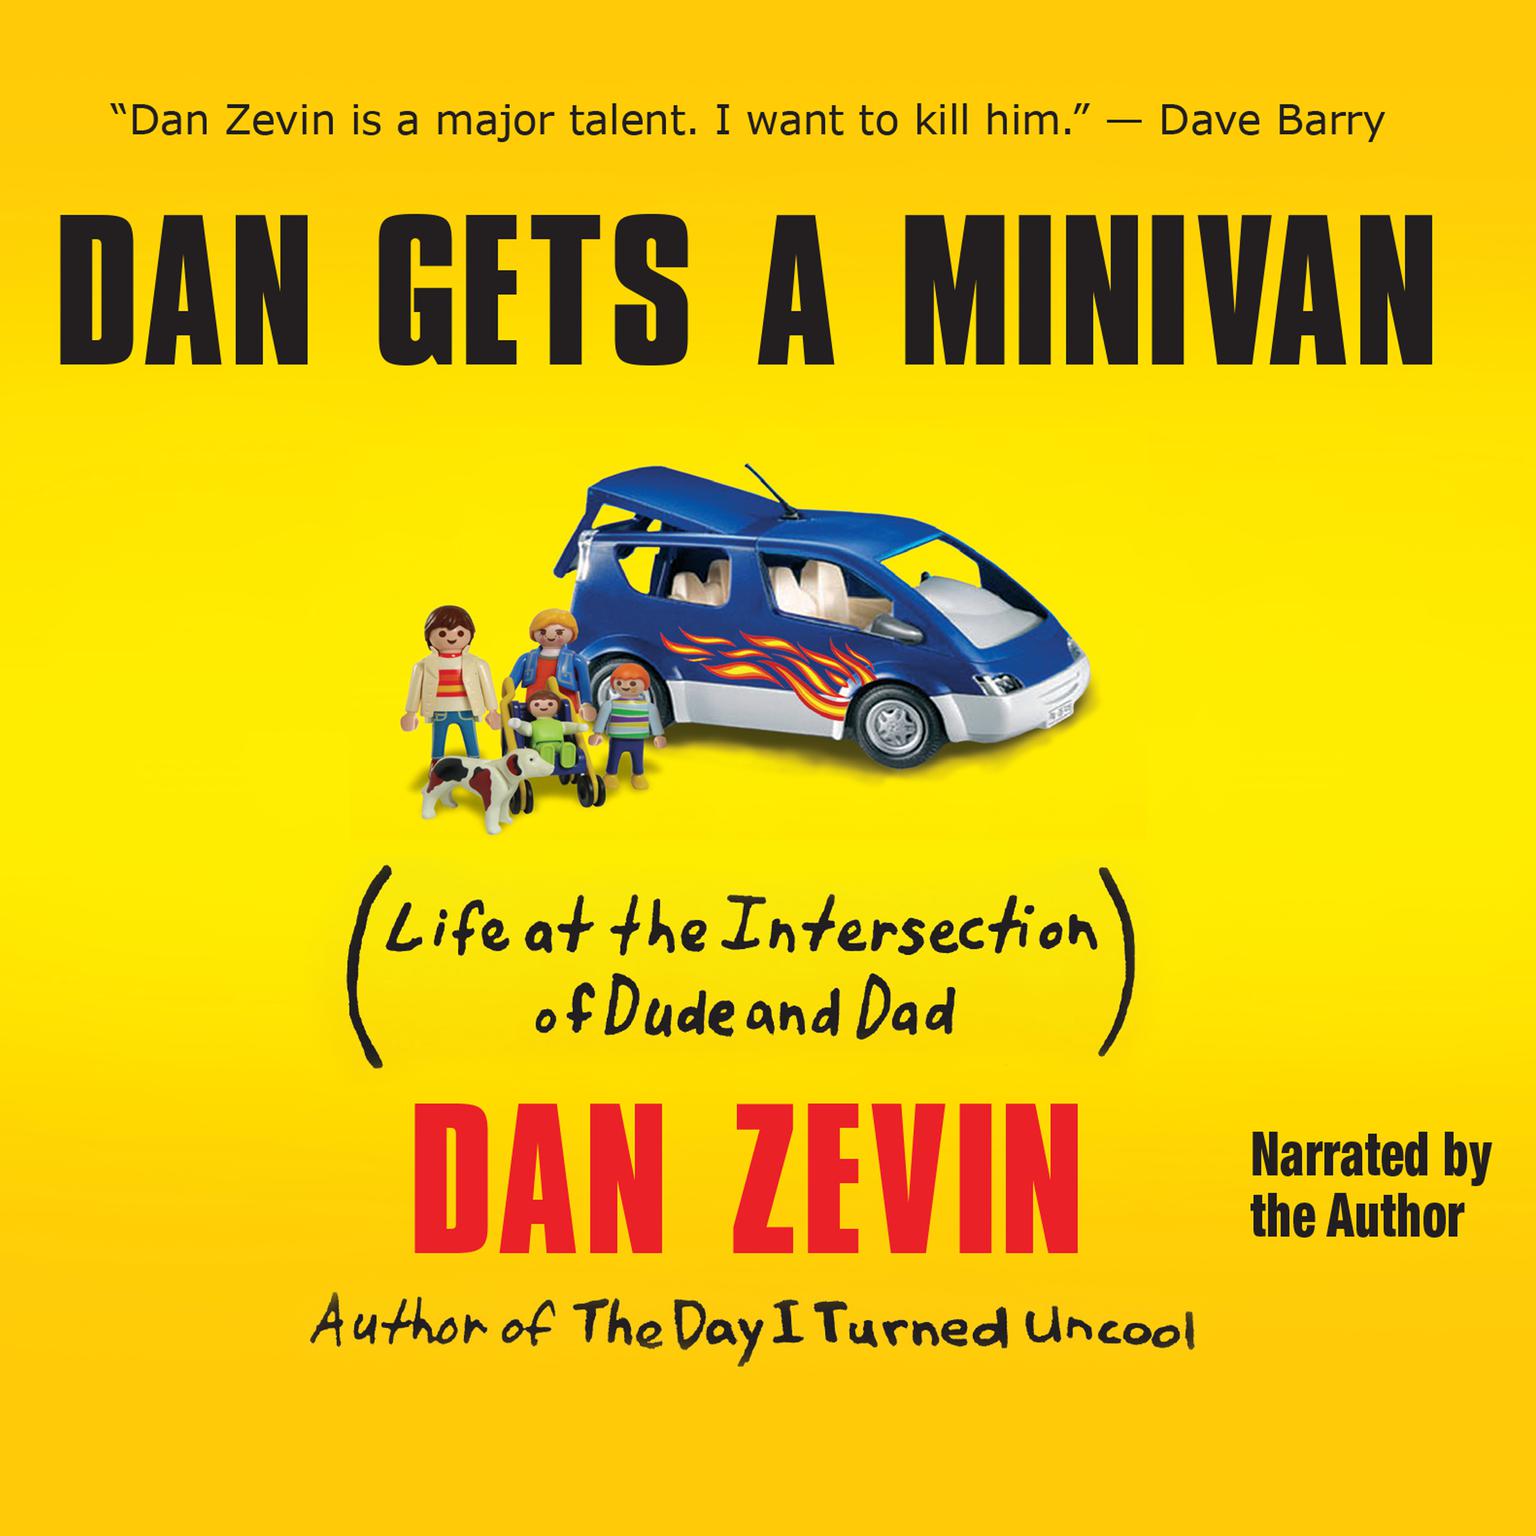 Dan Gets a Minivan: Life at the Intersection of Dude and Dad Audiobook, by Dan Zevin